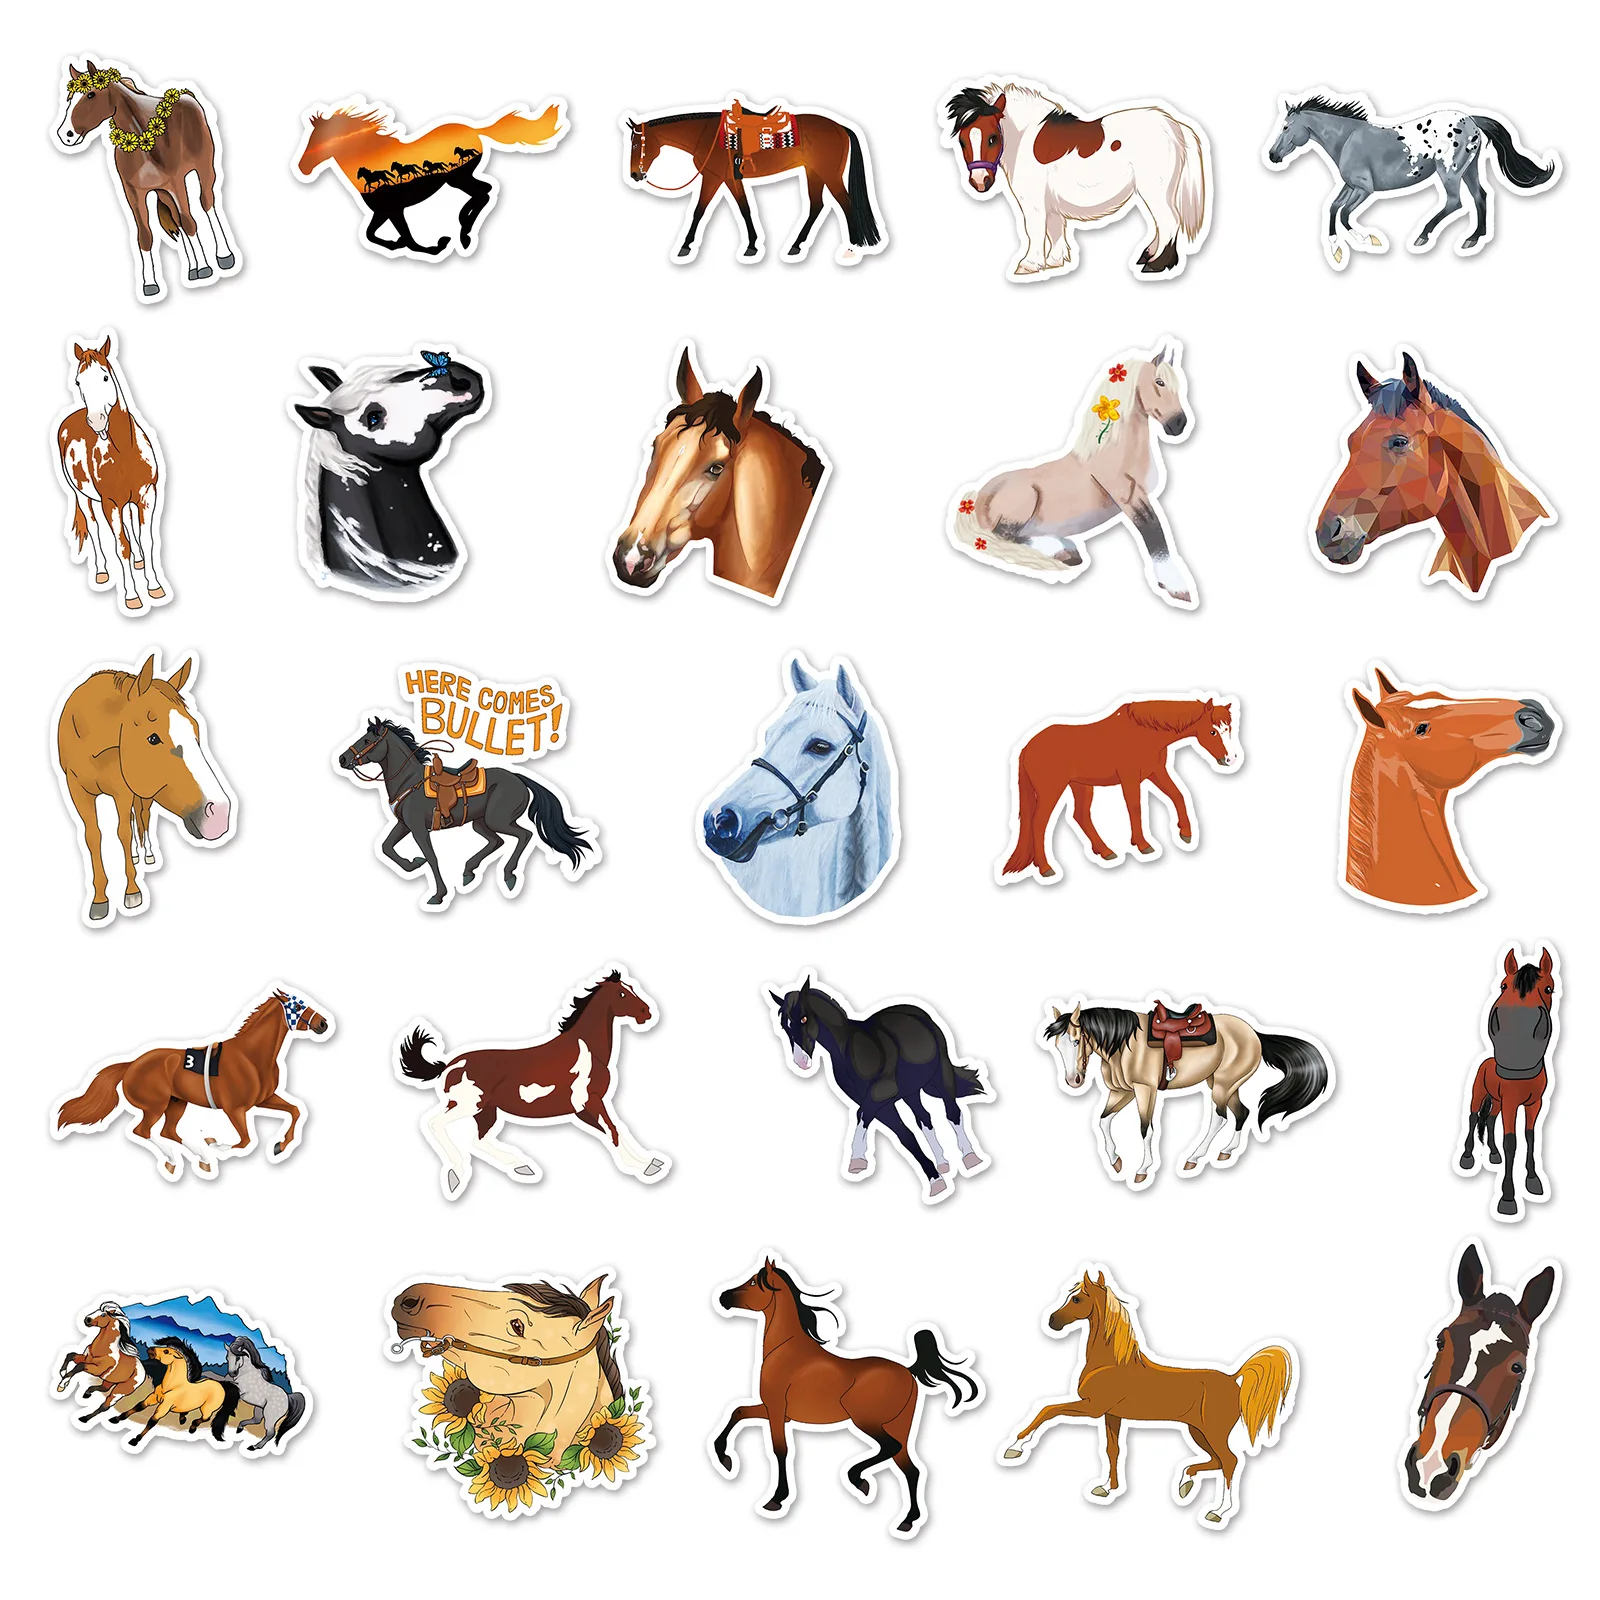 Stickers Aesthetic Things Kids Toys Cartoon Animal Horse Pony Sticker Kawaii Stationery Notebook Laptop Car Scrapbooking images - 6